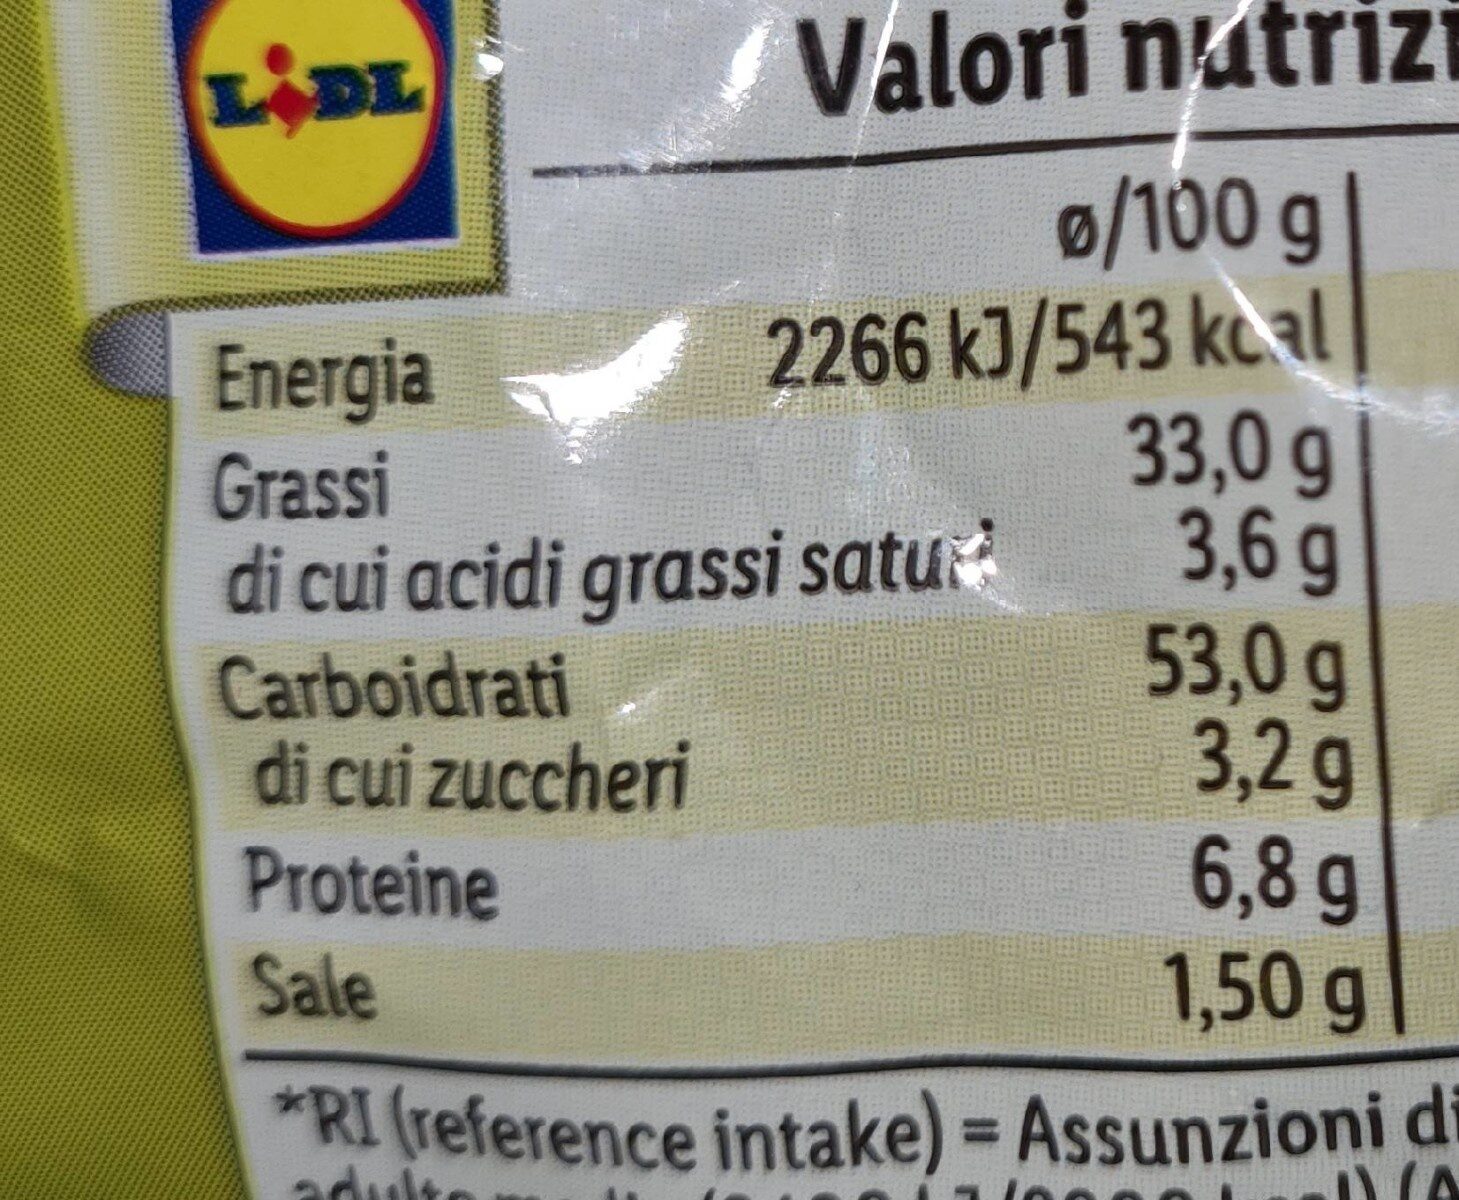 Patatine gusto pepe e lime - Nutrition facts - it